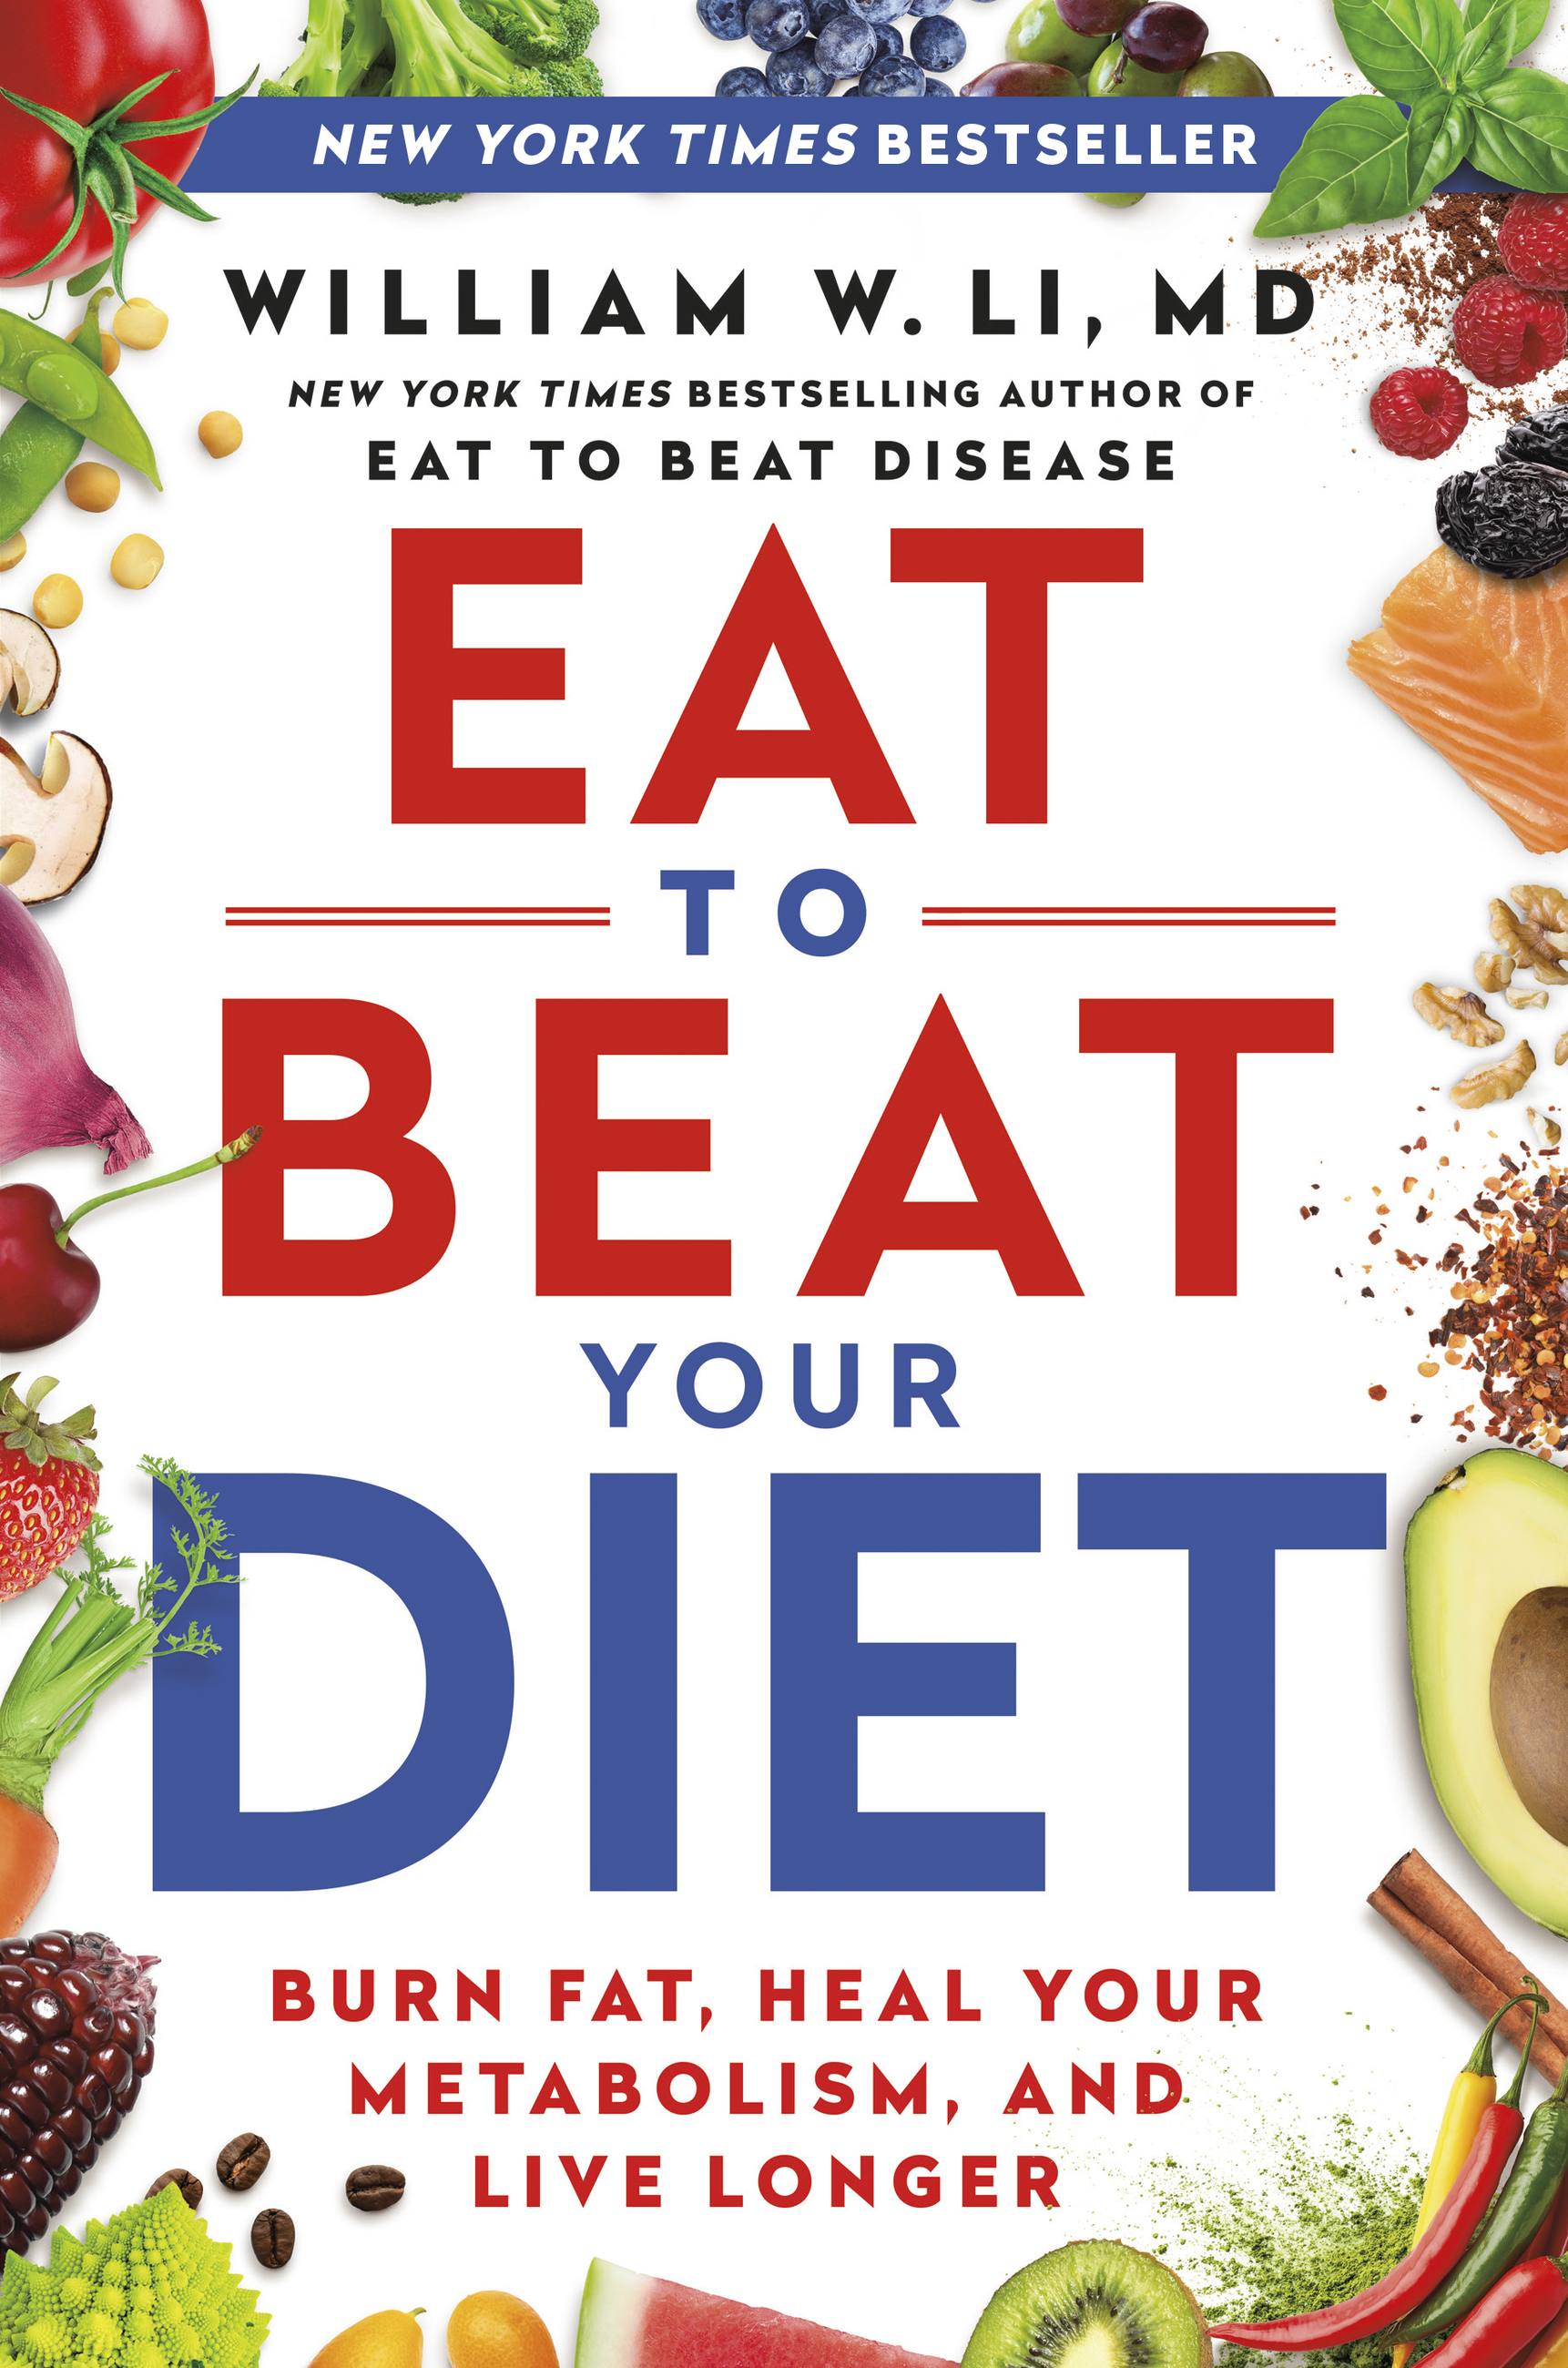 to　Your　MD　Eat　Li,　by　Hachette　William　Beat　Book　Group　Diet　W